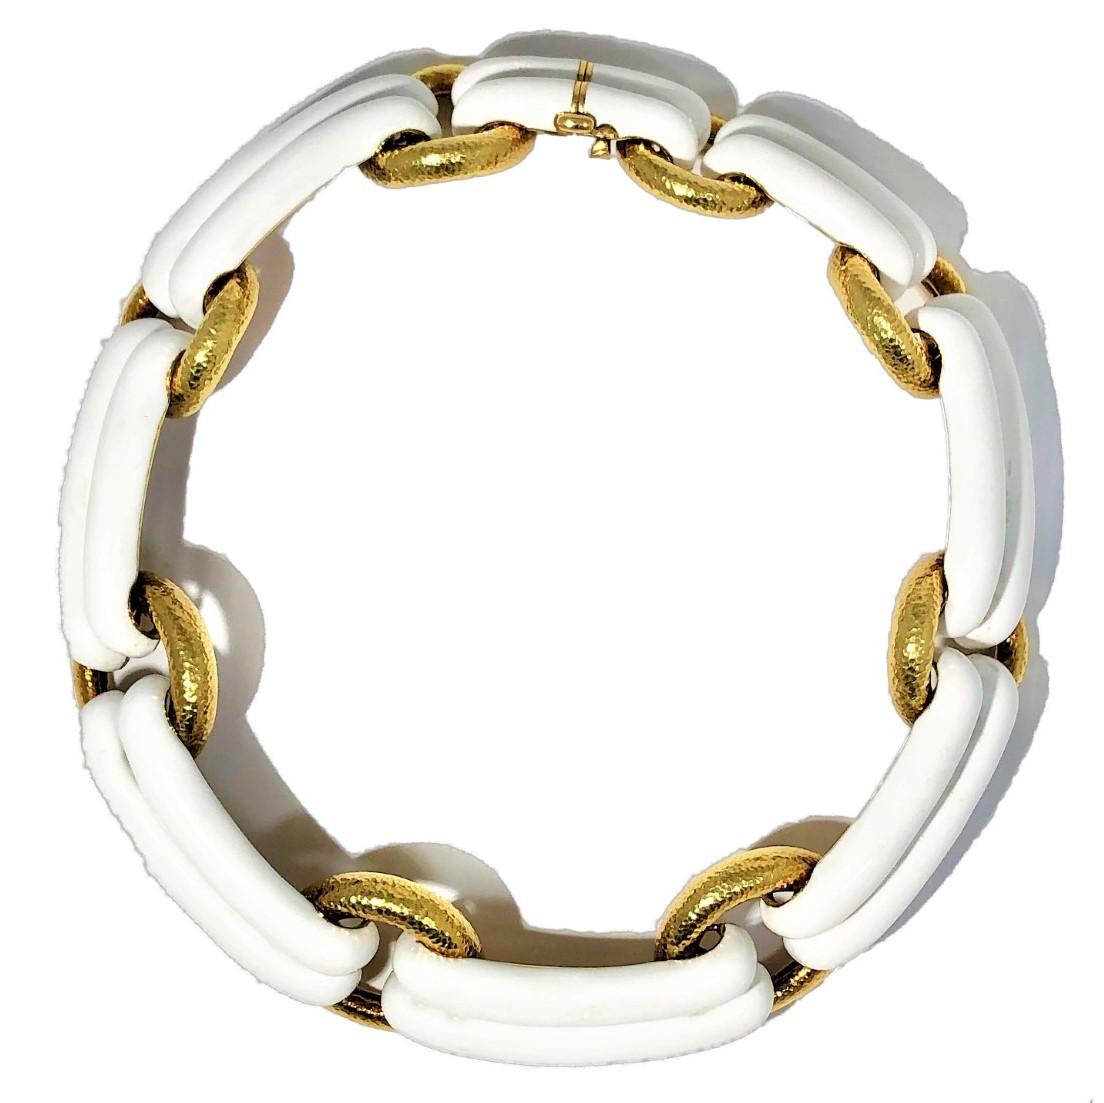 This magnificent David Webb 18k hammered finish gold and white enamel necklace is absolutely striking, not only because of it's simple and imaginative design, but because of it's grand scale as well. At it's widest point in the front, it measures a